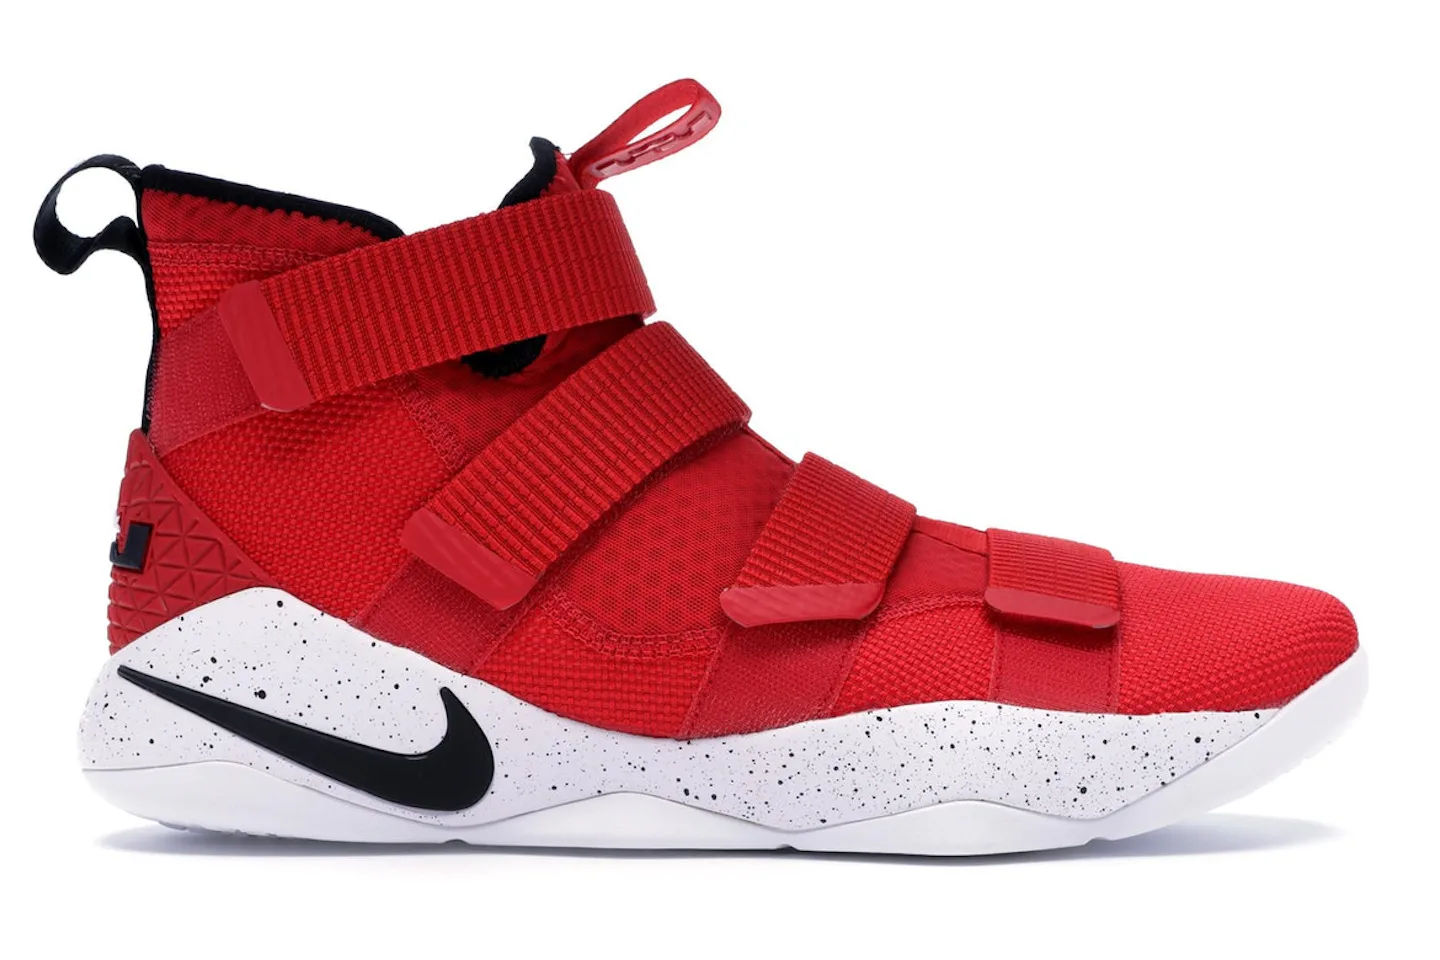 Nike LeBron Zoom Soldier 11 University Red White - 897644-601